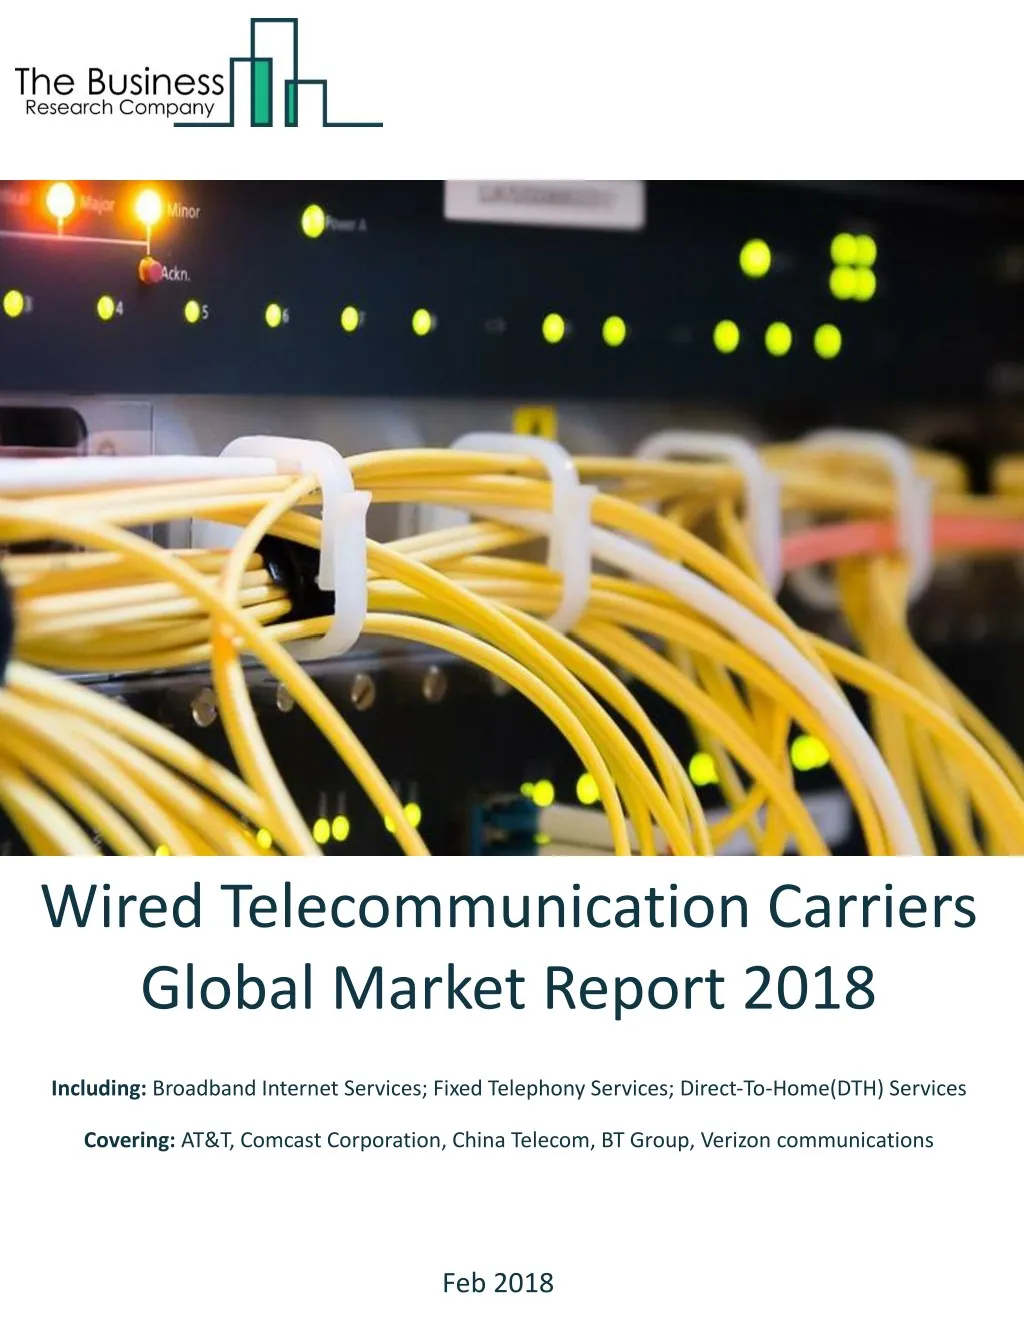 wired telecommunication carriers global market